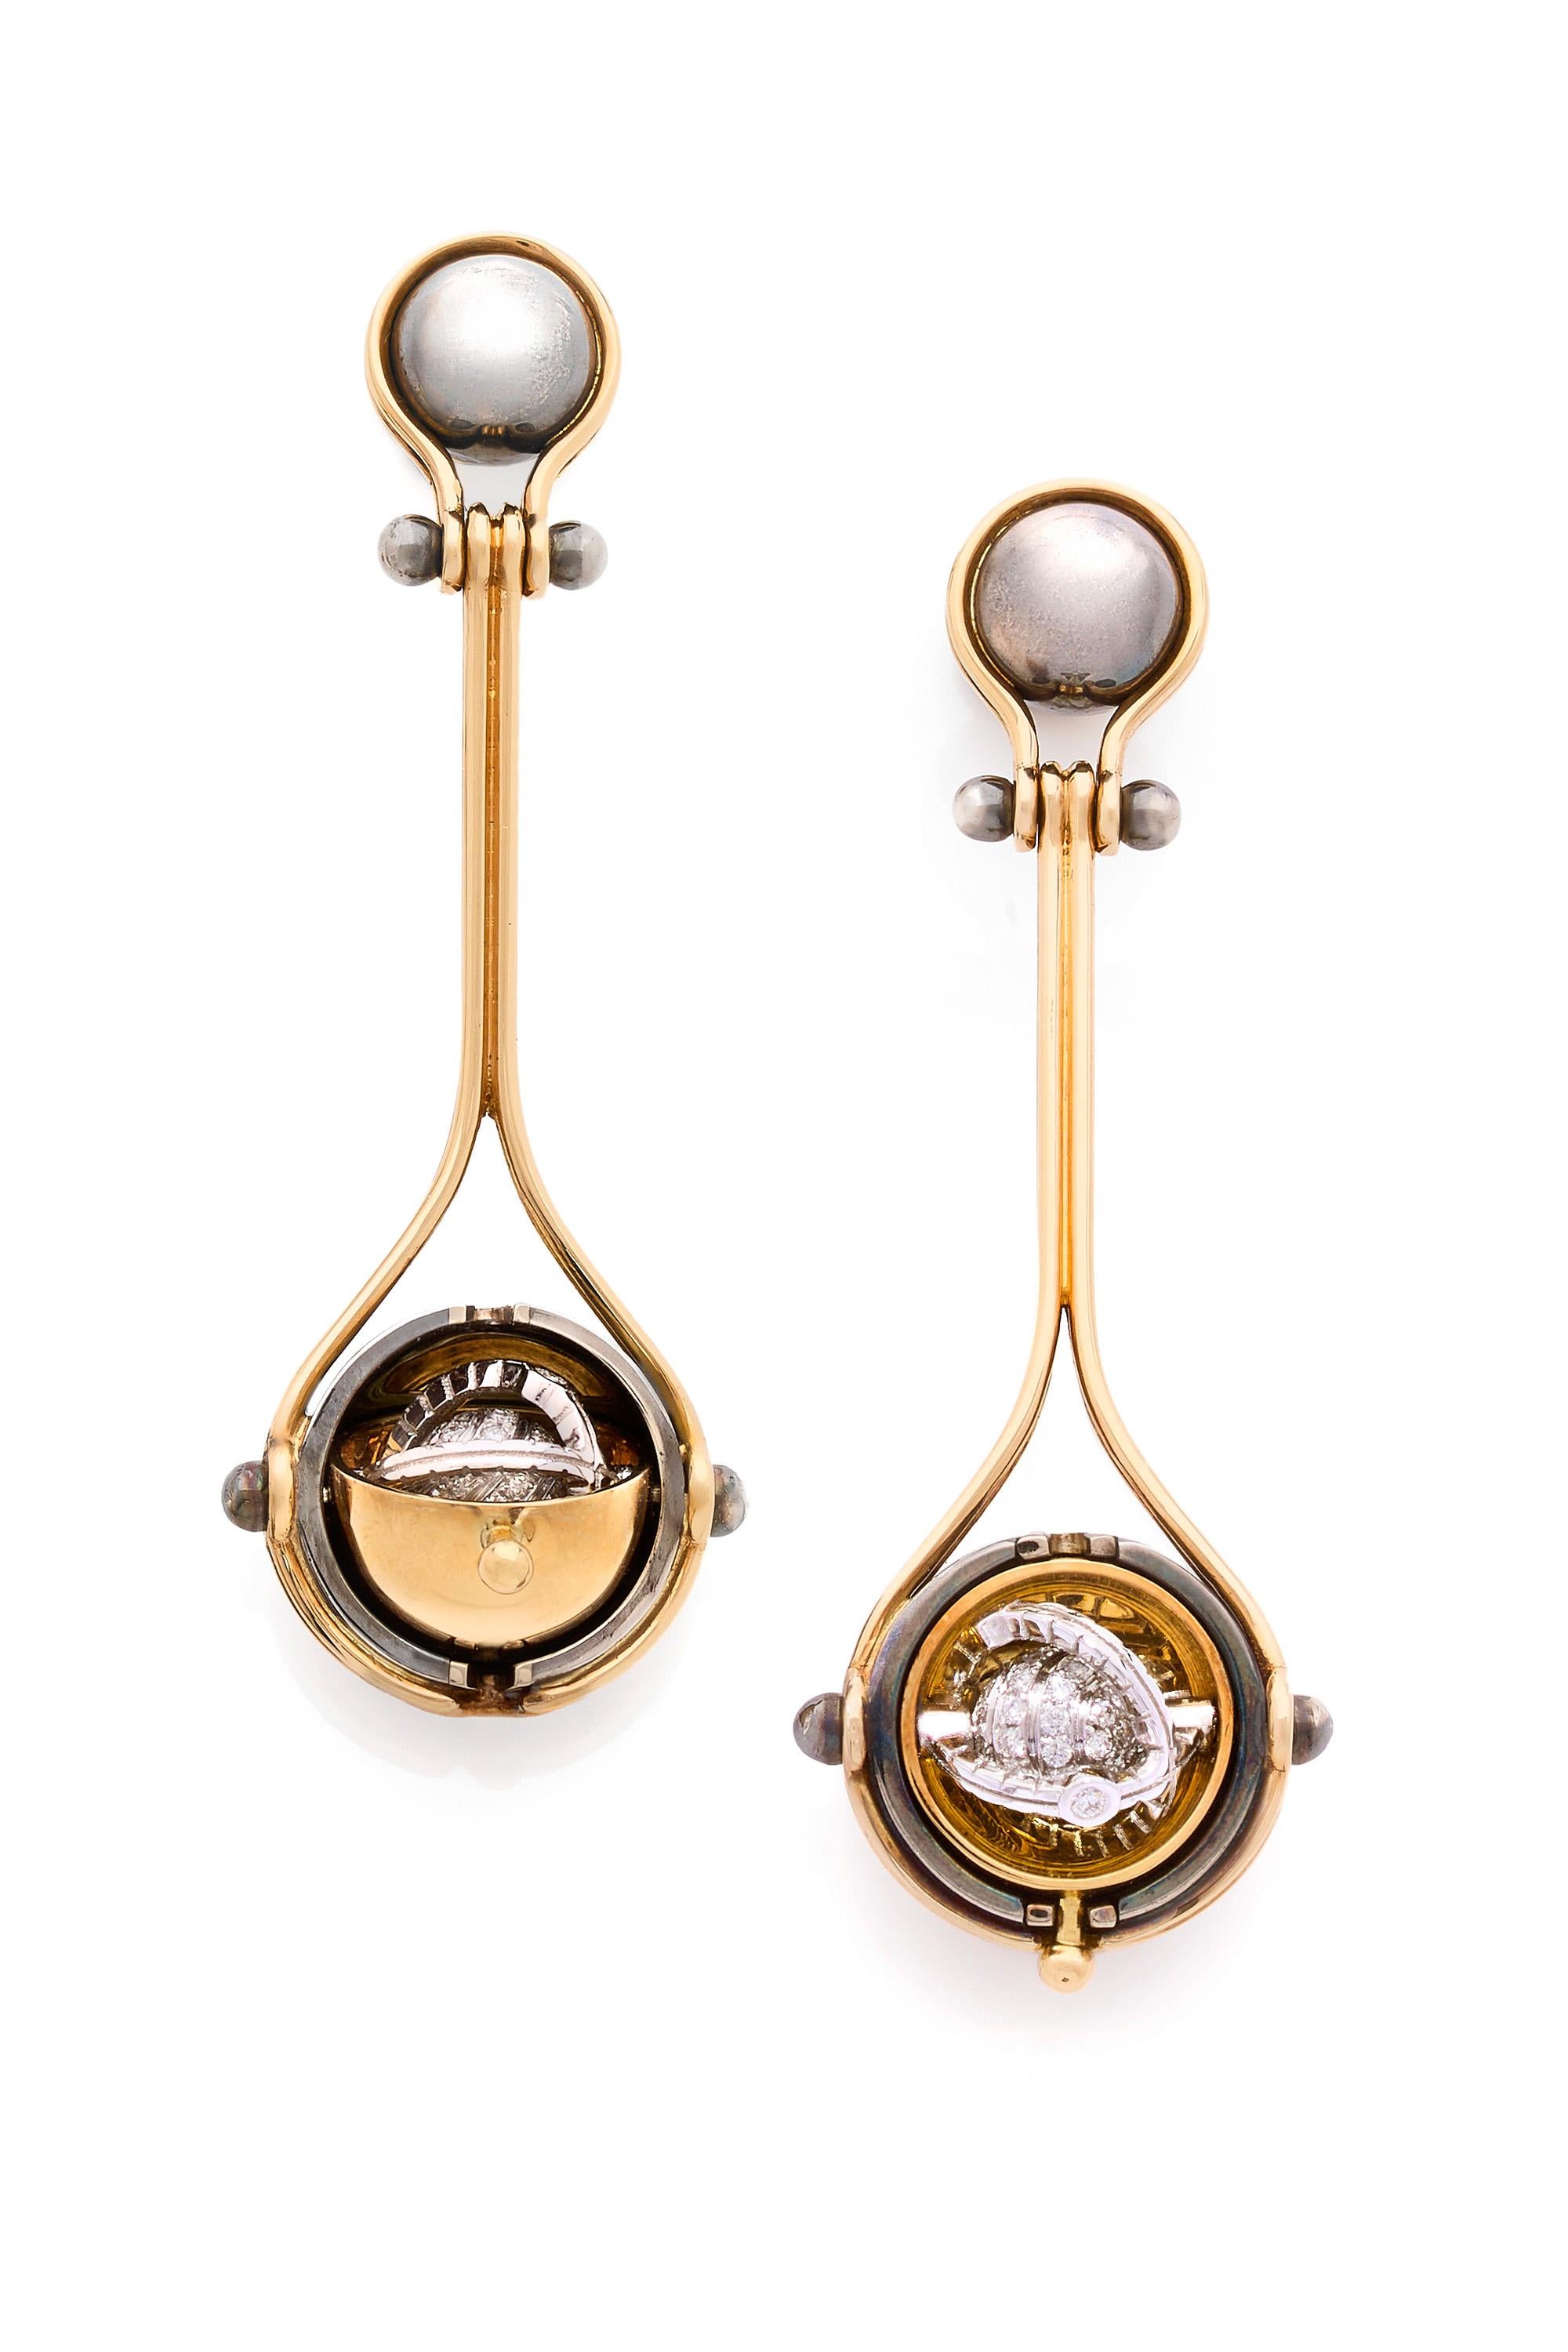 Yellow gold and distressed silver earrings. Rotating spheres revealing a planet of diamonds, encircled by a white gold ring, set with a diamond.  

Details:
124 Diamonds: 0.72 cts 
18k Yellow Gold: 14 g
Distressed Silver: 5 g
Made in France